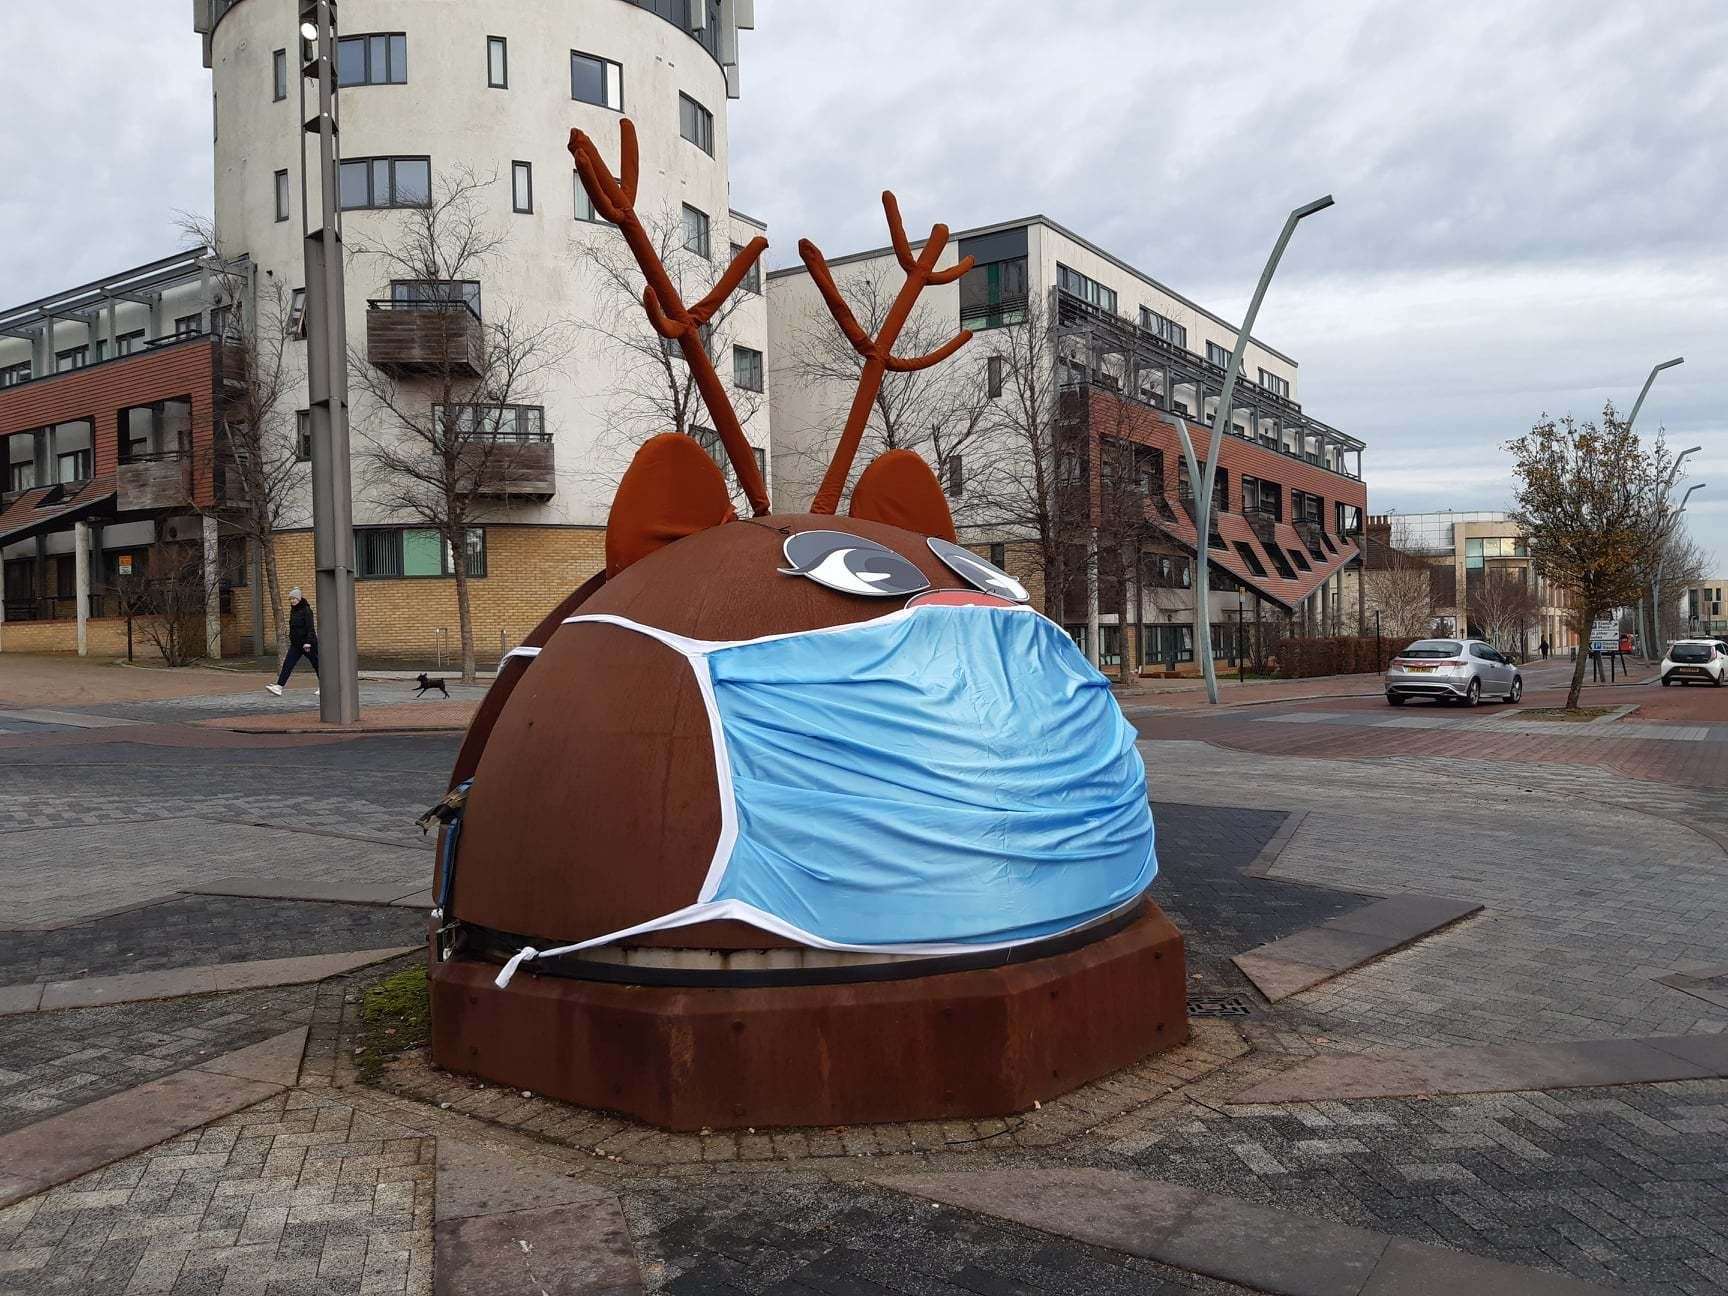 The Bolt Roundabout has been given a Covid-related Christmas makeover this year